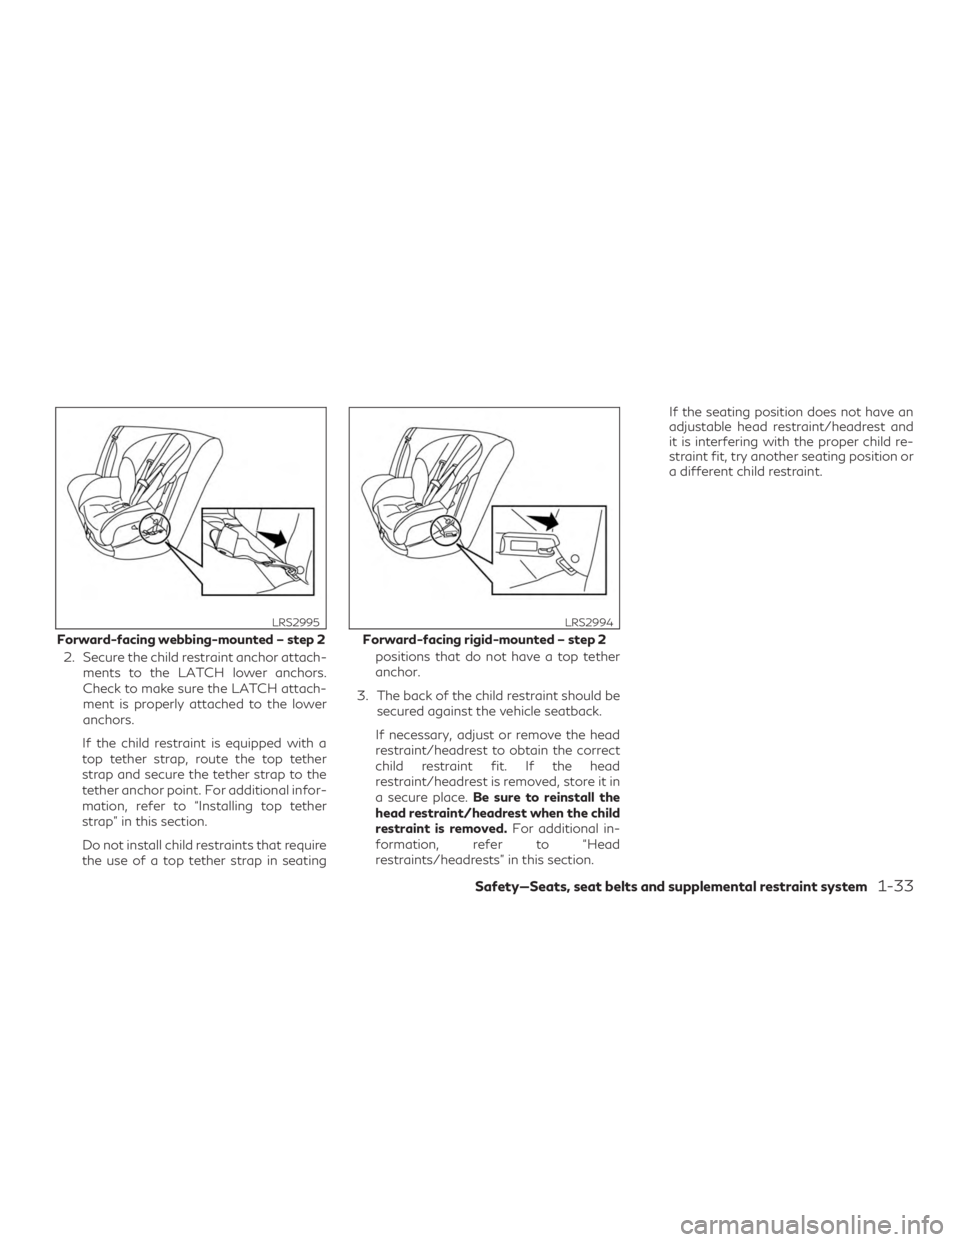 INFINITI QX50 2020  Owners Manual 2. Secure the child restraint anchor attach-ments to the LATCH lower anchors.
Check to make sure the LATCH attach-
ment is properly attached to the lower
anchors.
If the child restraint is equipped wi